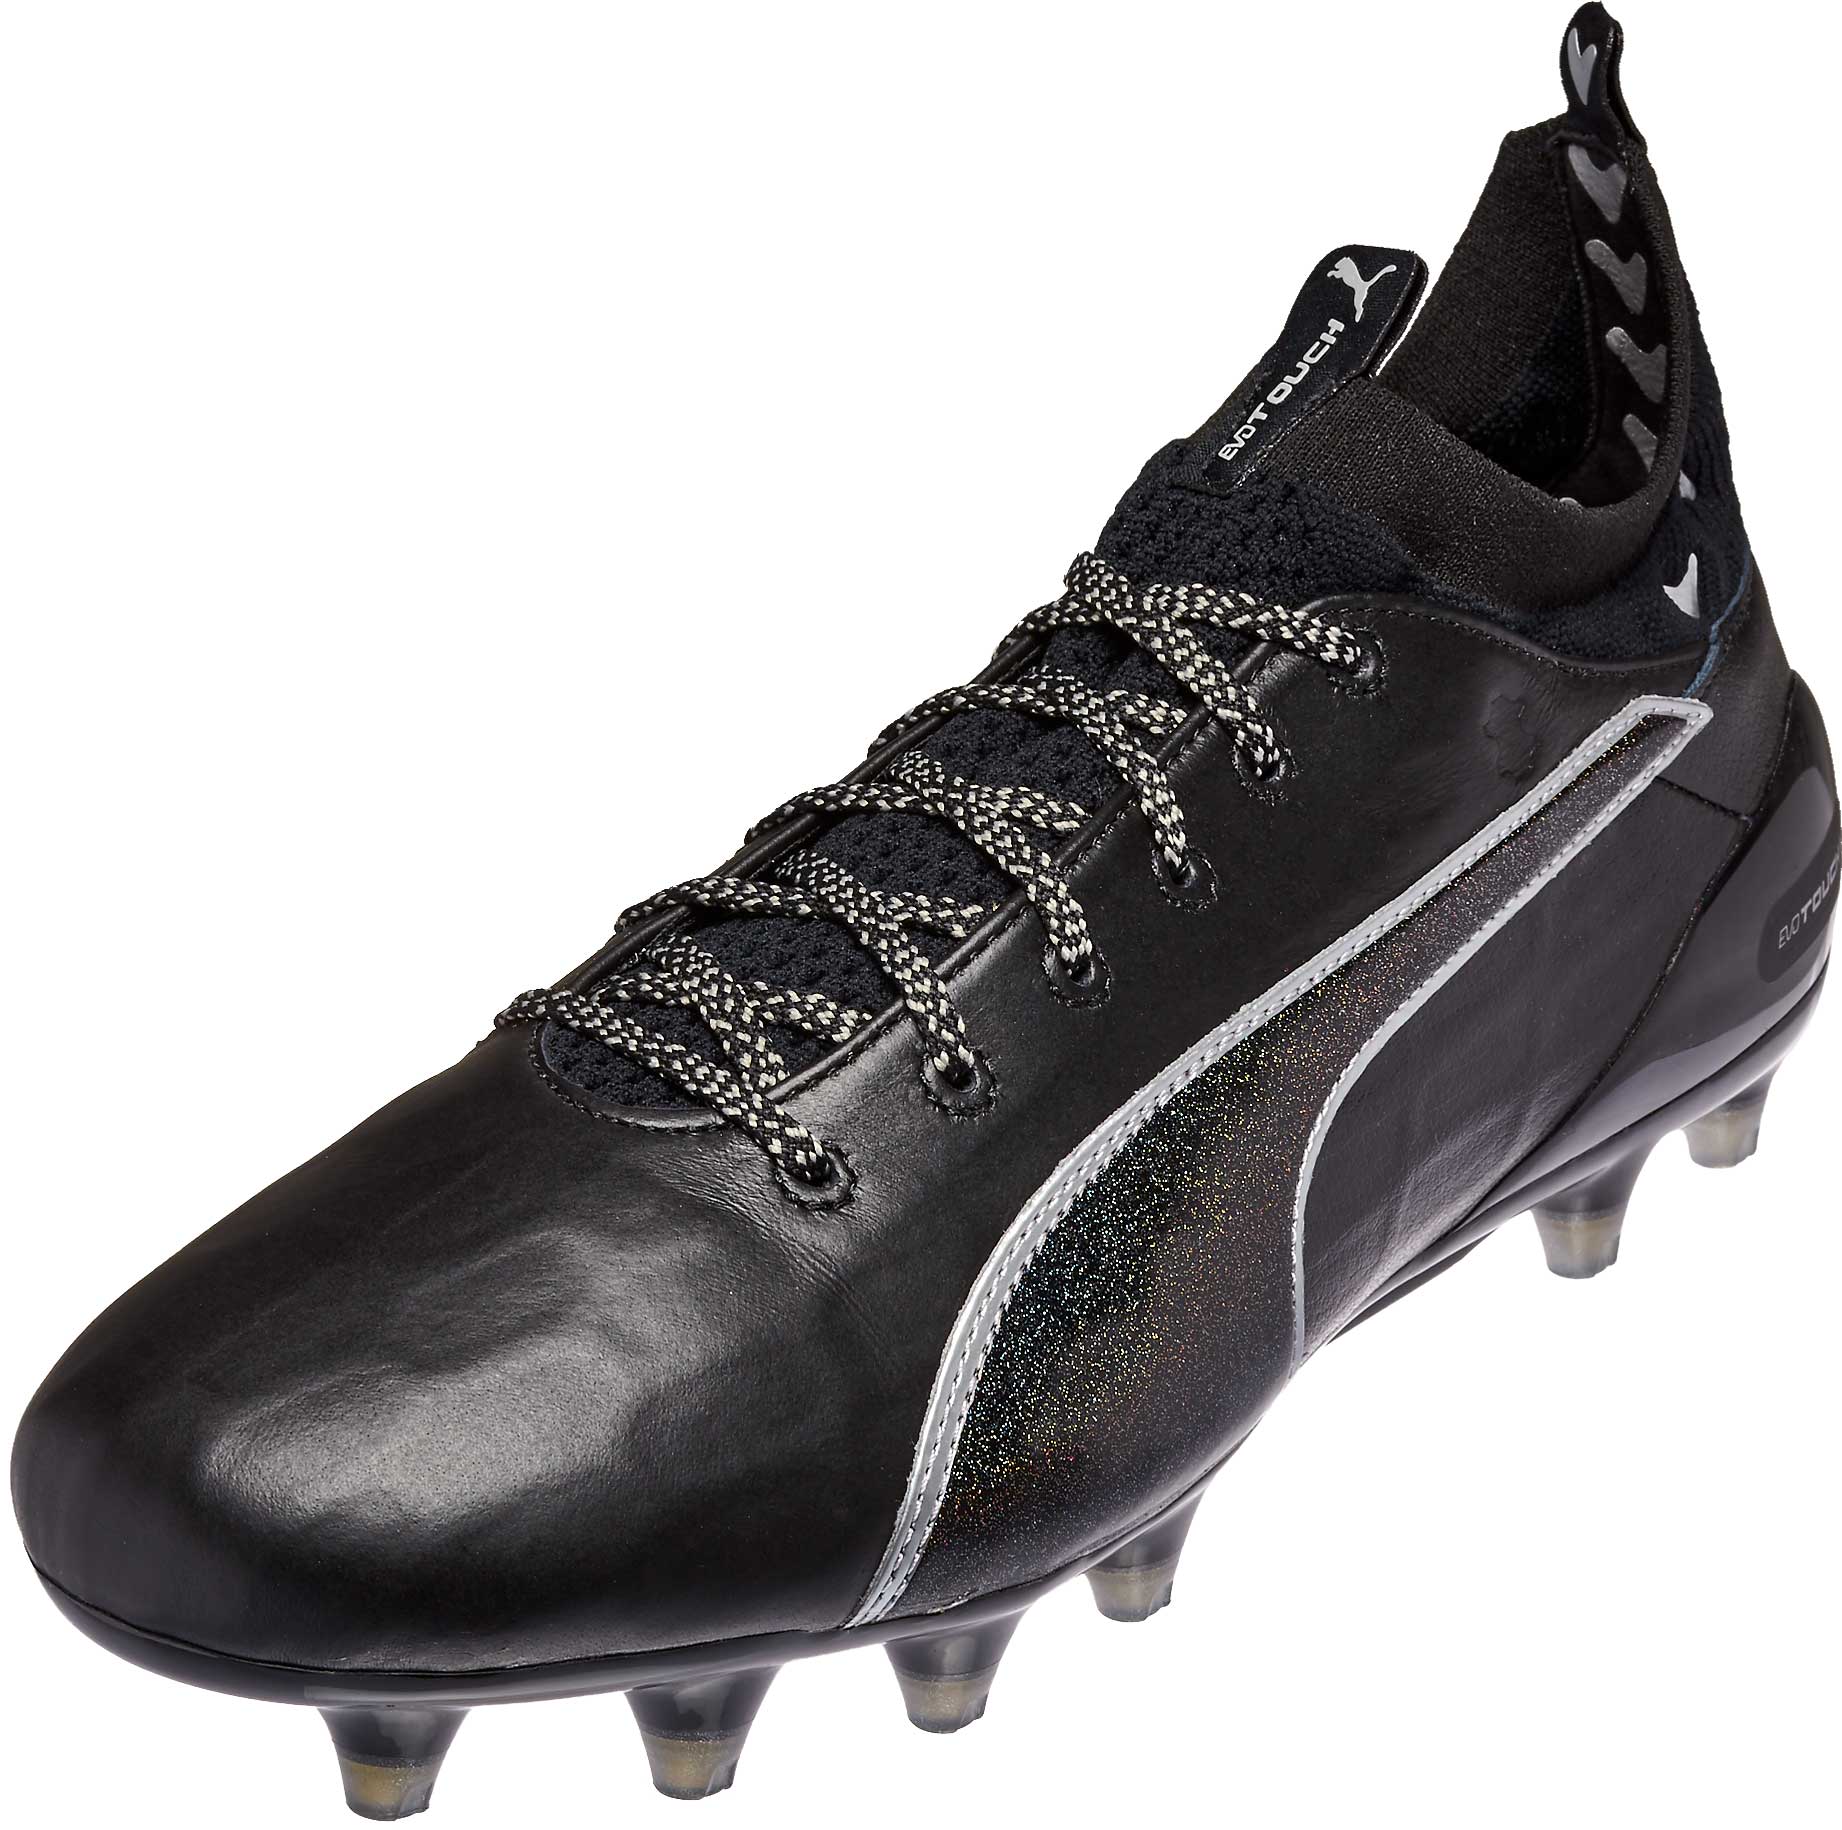 puma soccer boots price in south africa